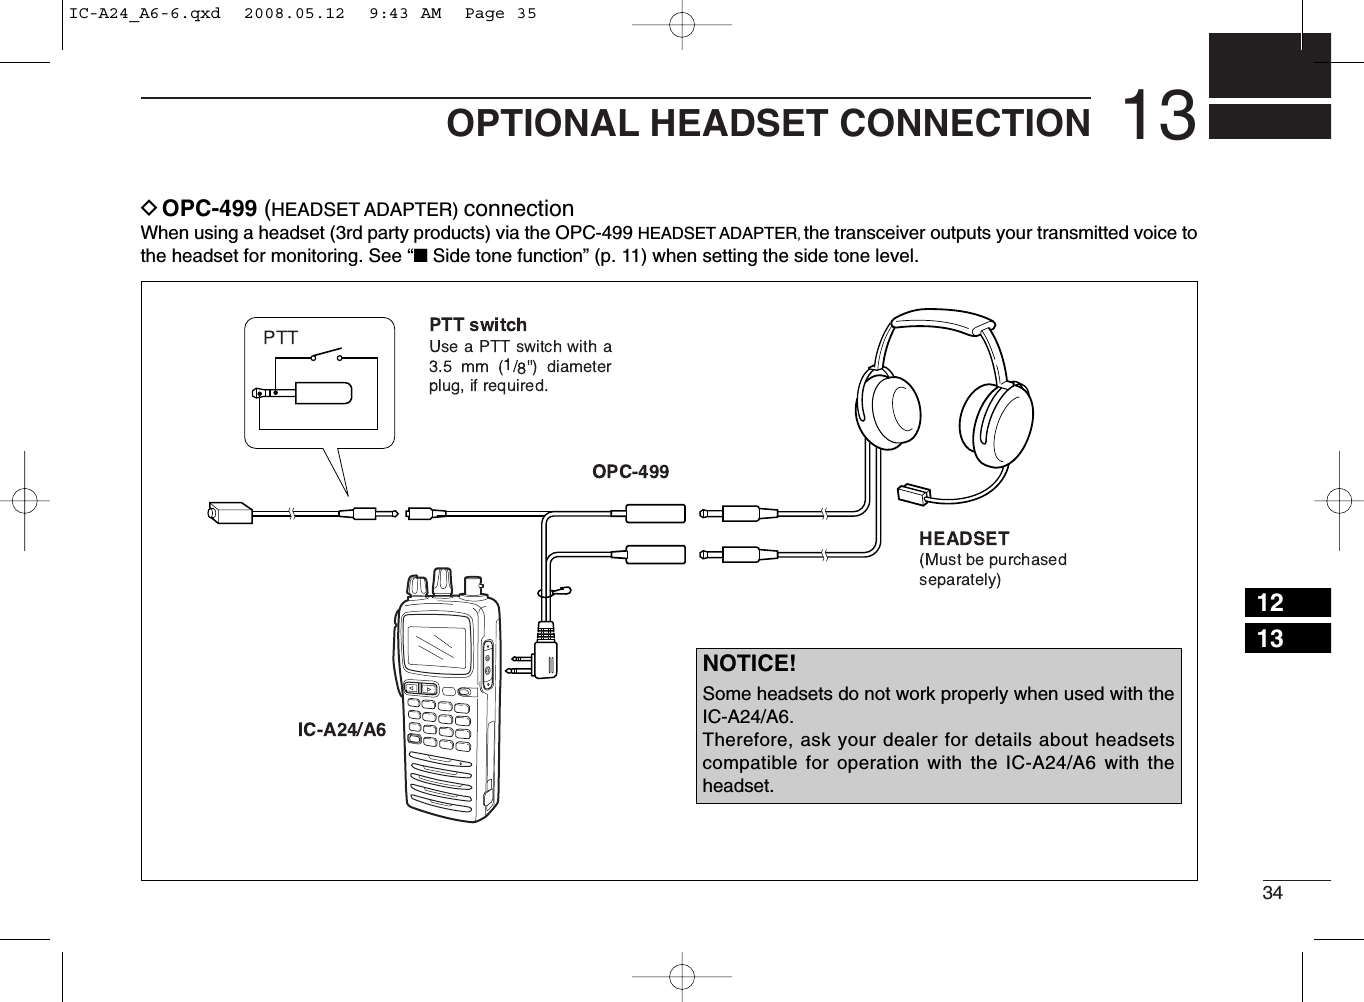 3413OPTIONAL HEADSET CONNECTIONDOPC-499 (HEADSET ADAPTER) connectionWhen using a headset (3rd party products) via the OPC-499 HEADSET ADAPTER, the transceiver outputs your transmitted voice tothe headset for monitoring. See “■Side tone function” (p. 11) when setting the side tone level.1213NOTICE!Some headsets do not work properly when used with theIC-A24/A6.Therefore, ask your dealer for details about headsetscompatible for operation with the IC-A24/A6 with theheadset.IC-A24_A6-6.qxd  2008.05.12  9:43 AM  Page 35